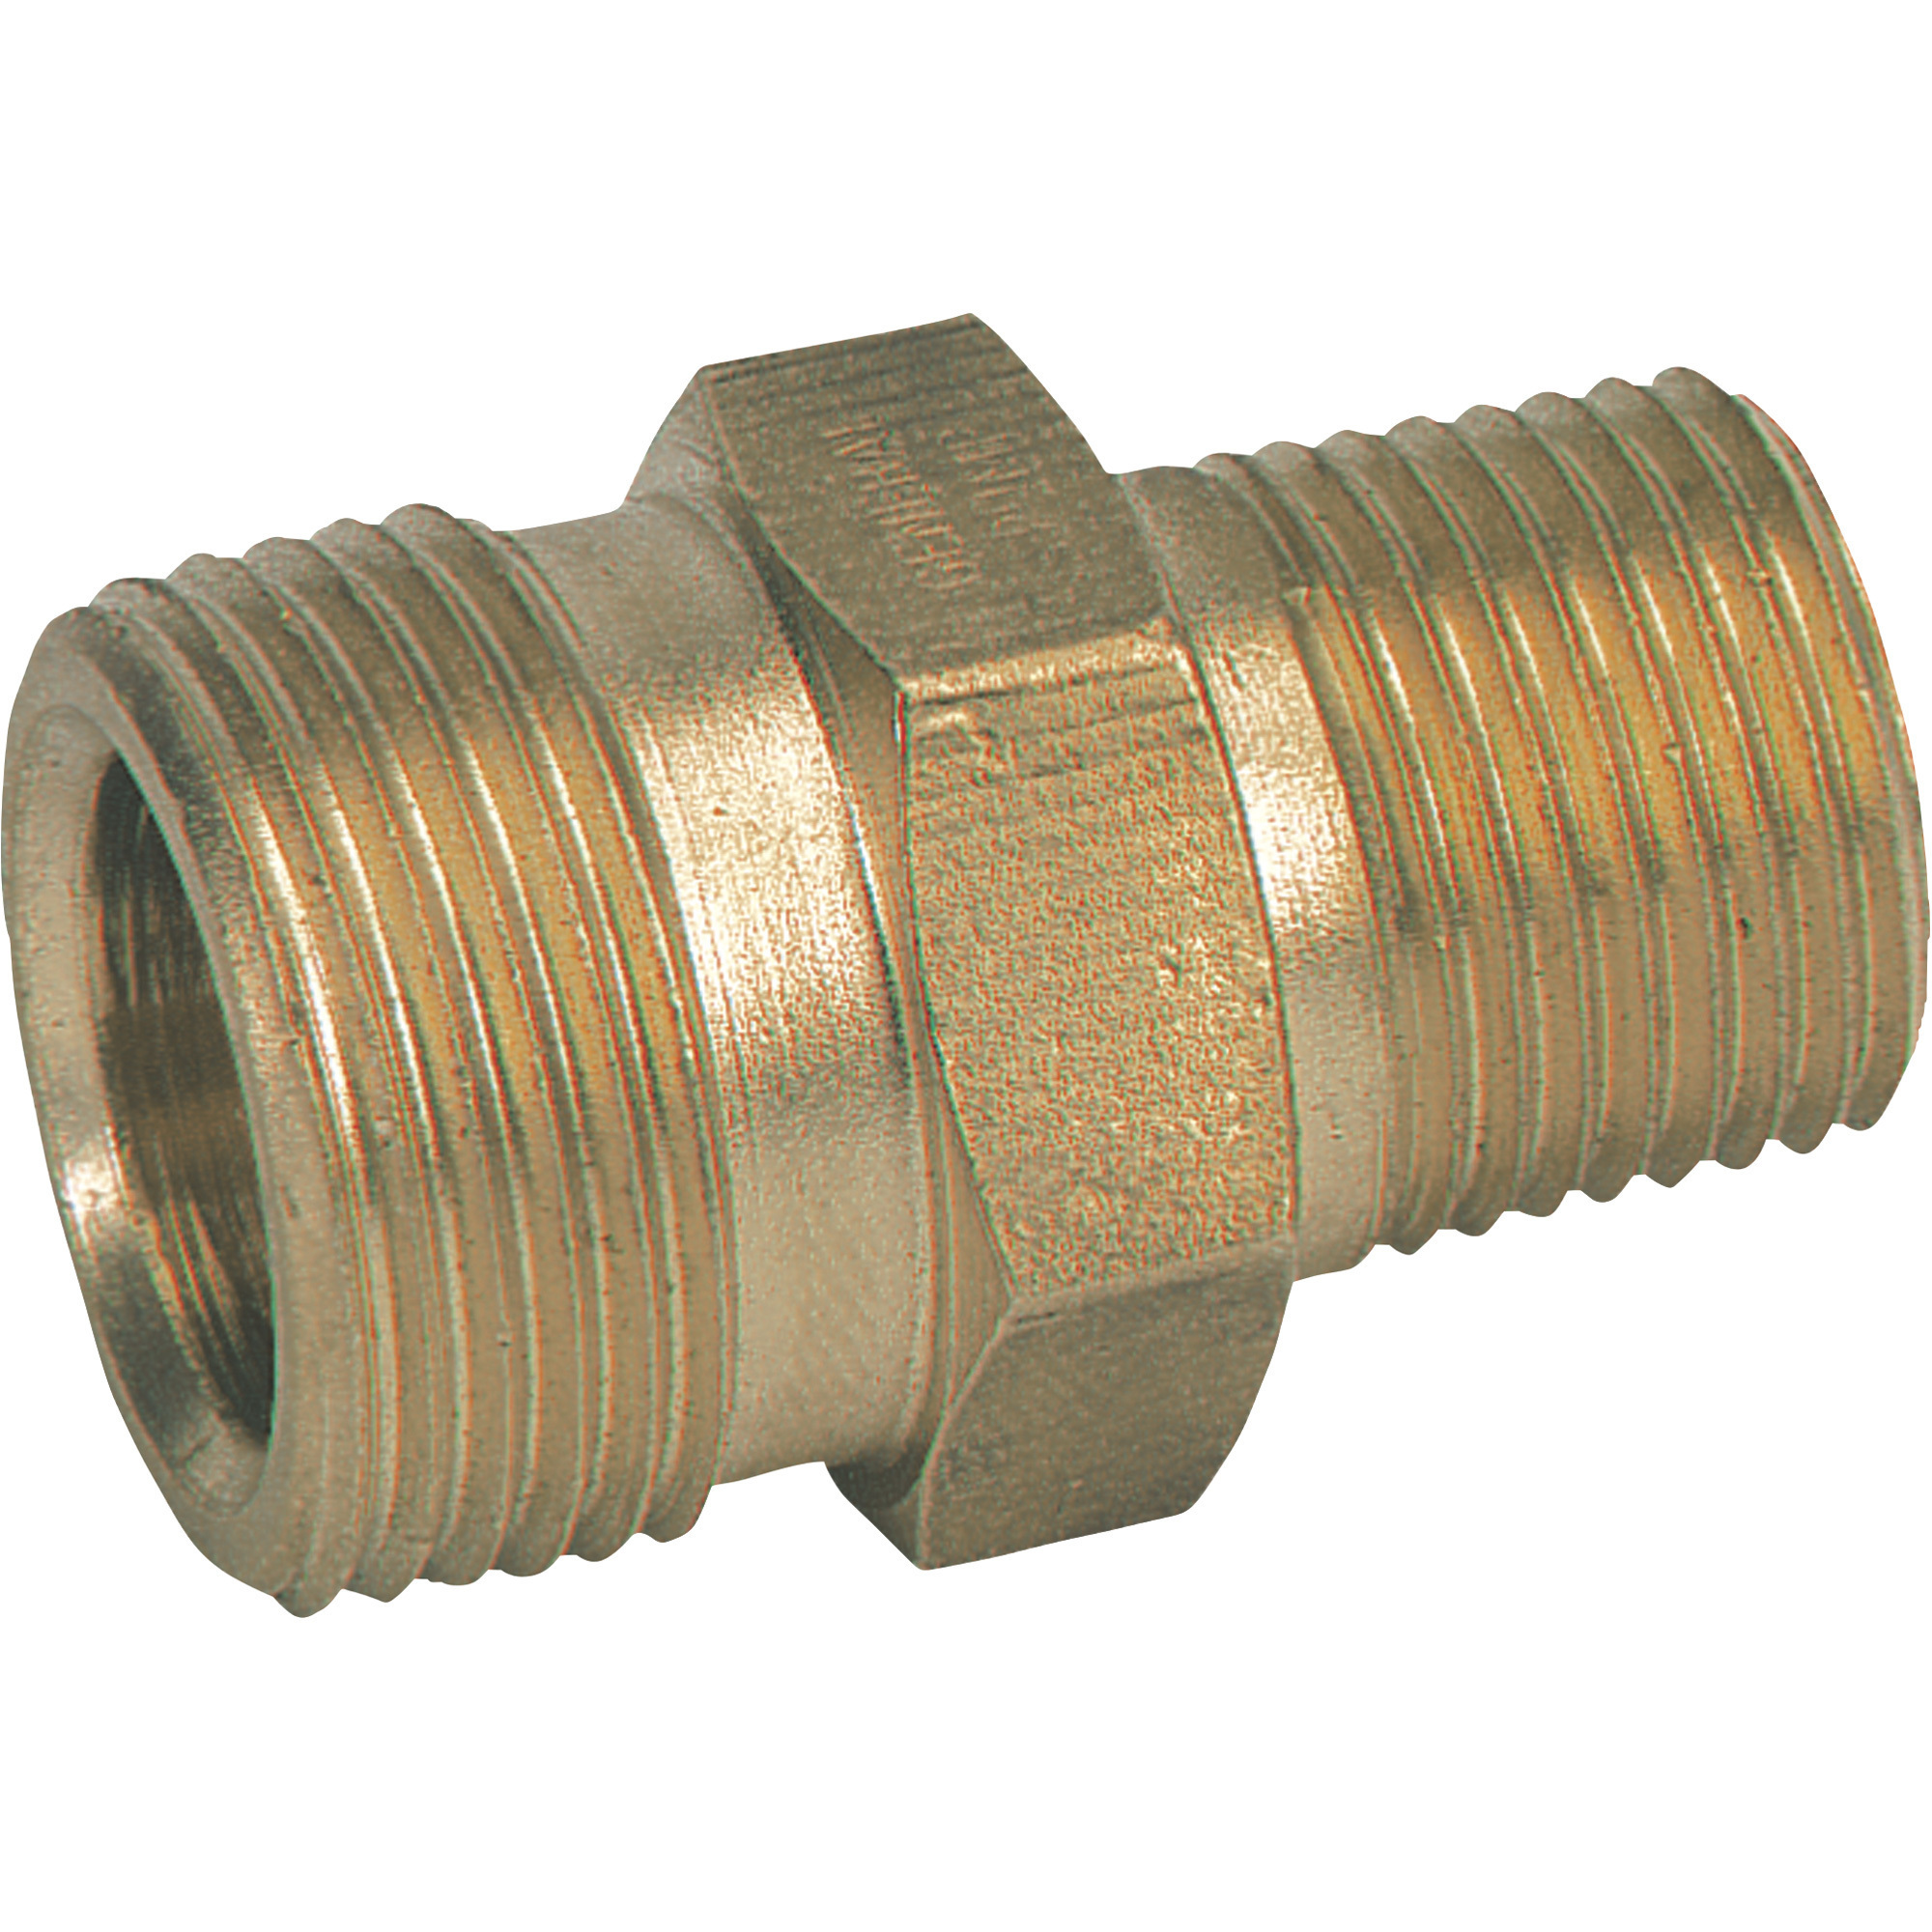 General Pump Pressure Washer Quick-Connect Adapter â 3/8Inch Inlet, 4000 PSI, Brass, Model ND10023P